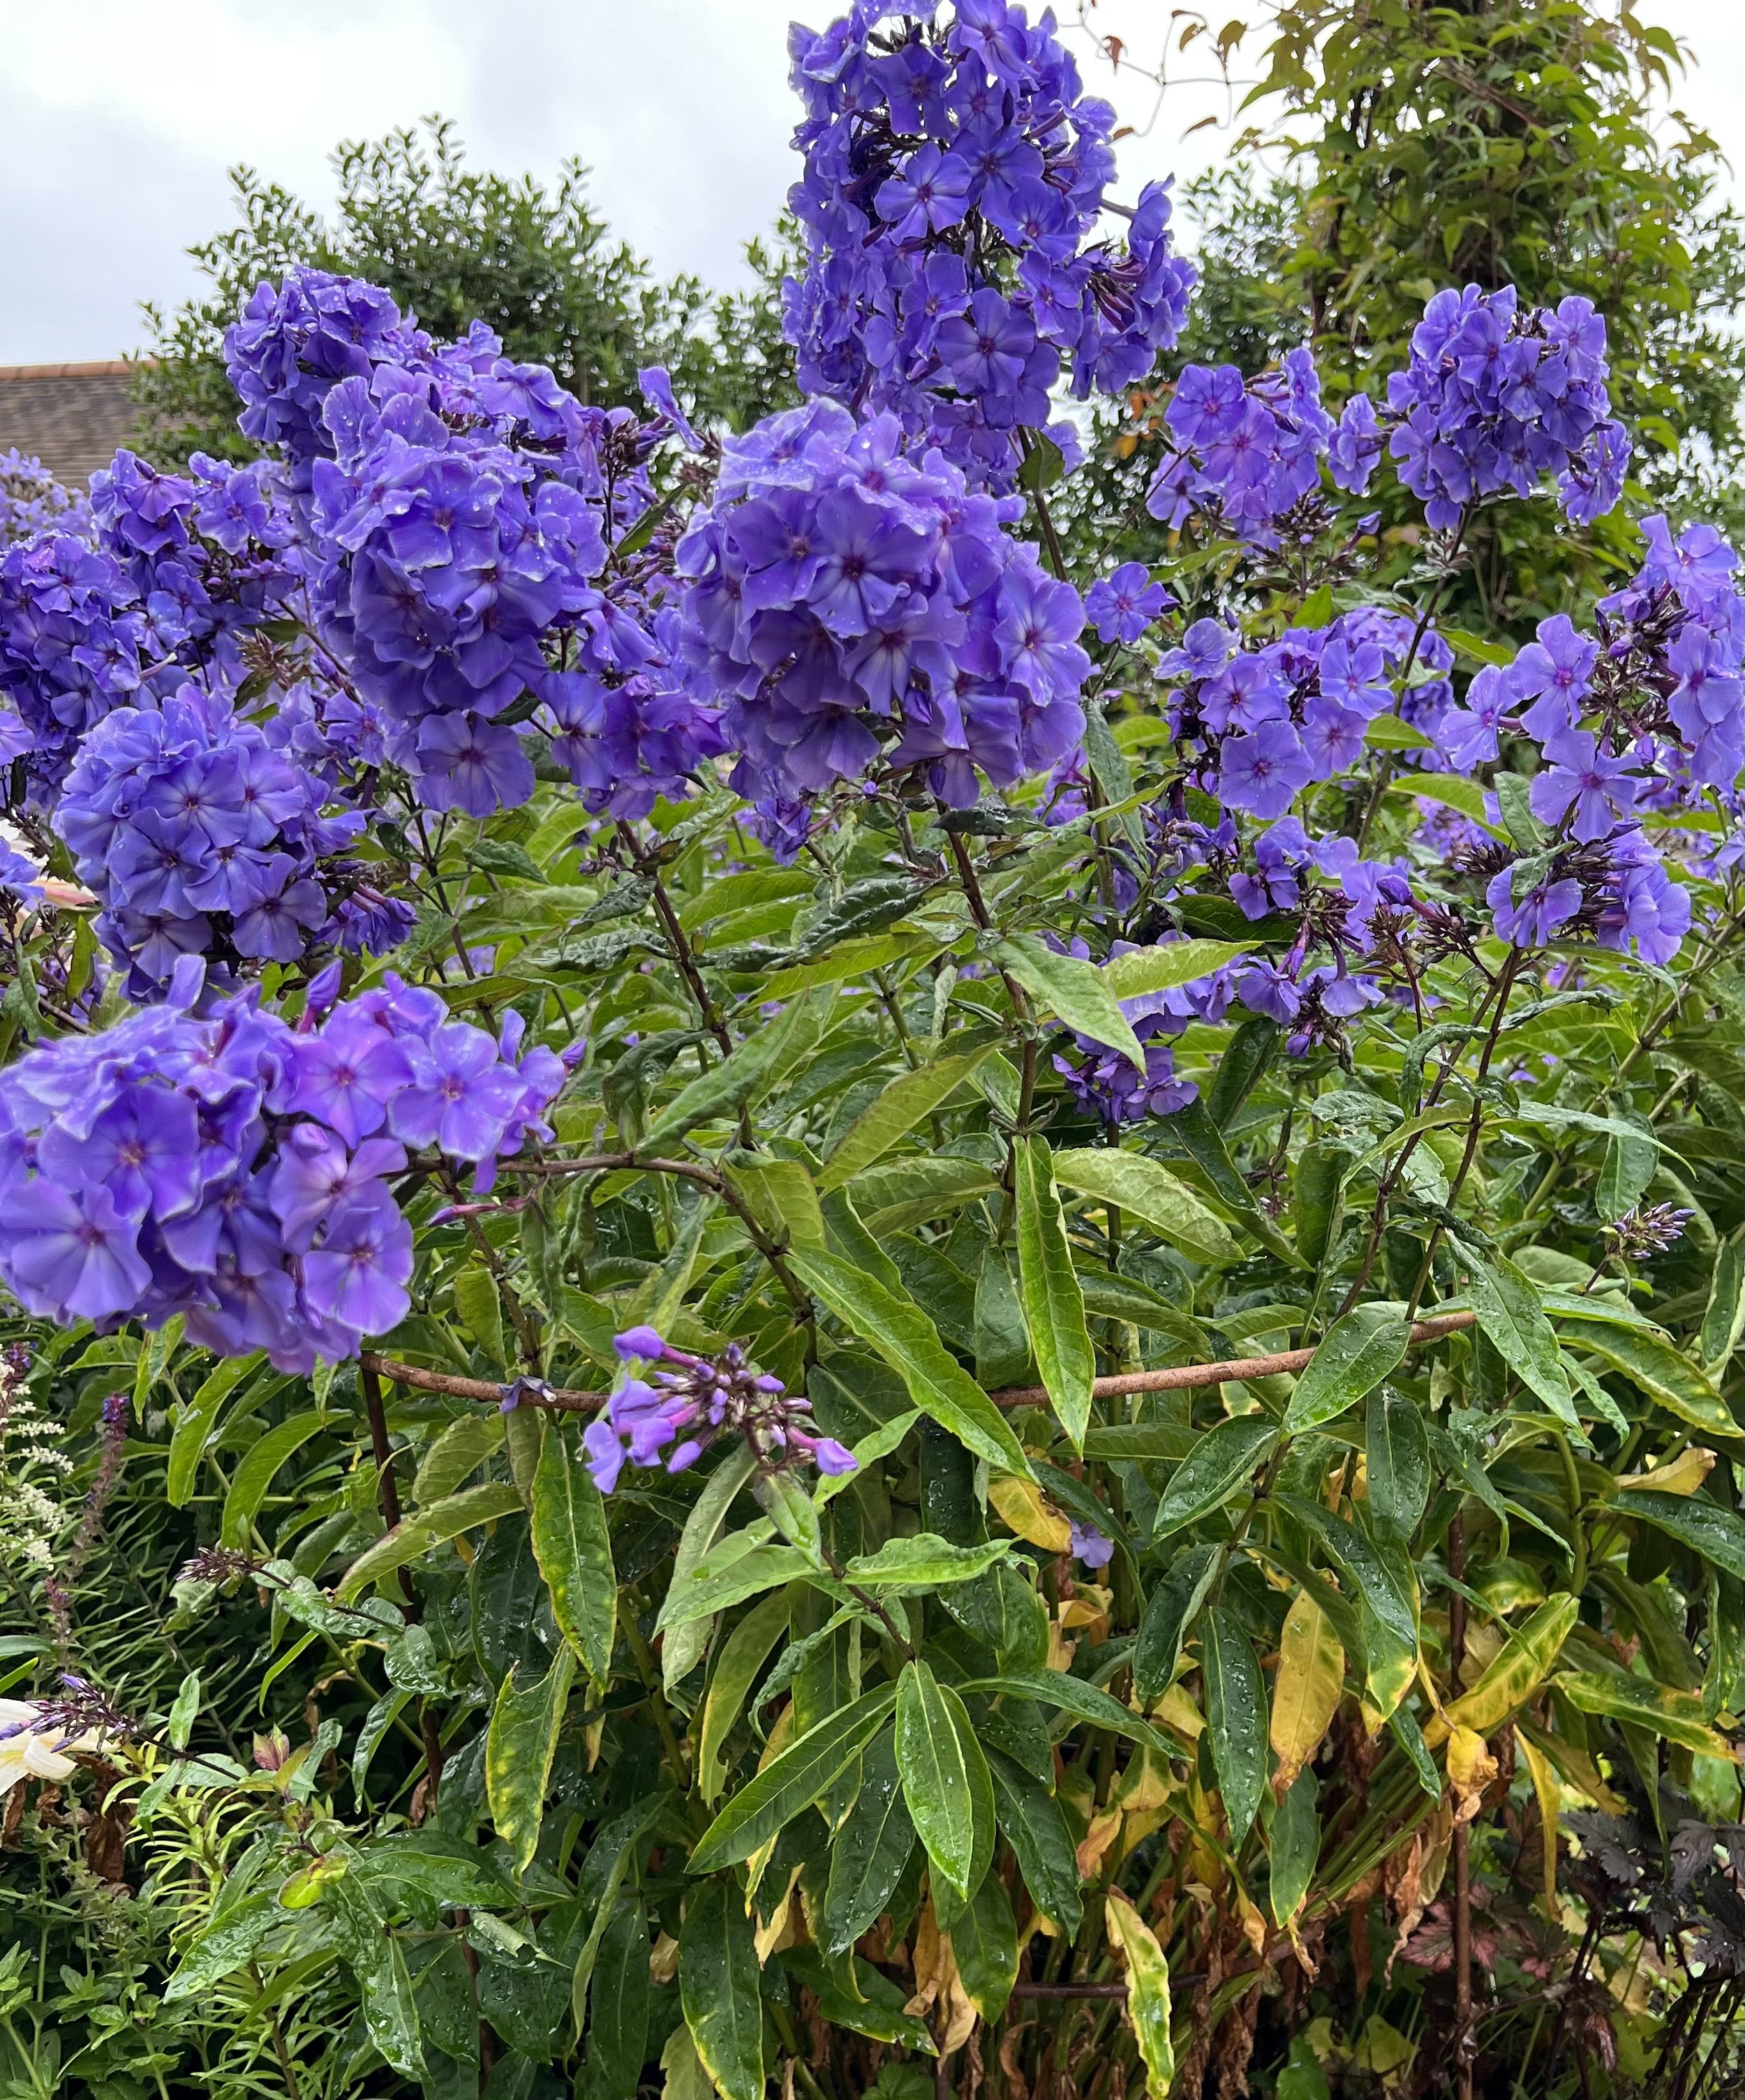 The heavy blooms of the phlox are supported after the rain storm